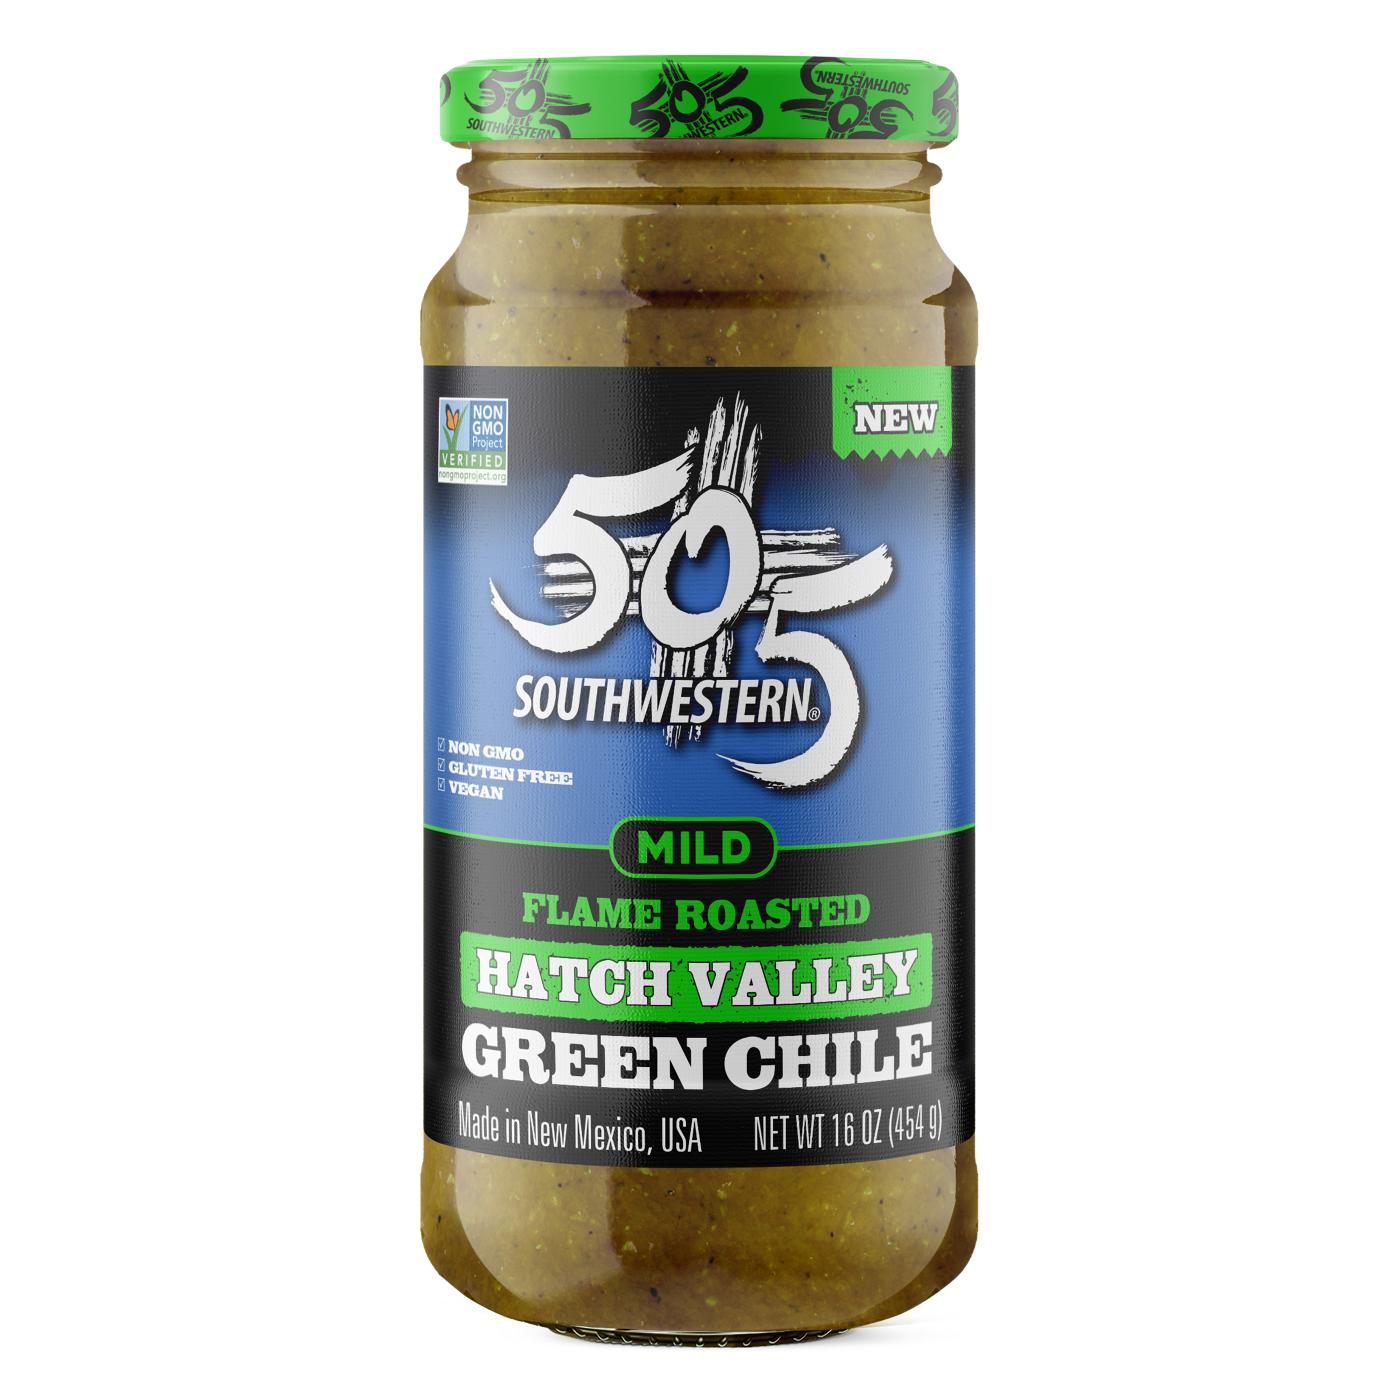 505 Southwestern Mild Flame Roasted Hatch Valley Green Chile; image 1 of 2